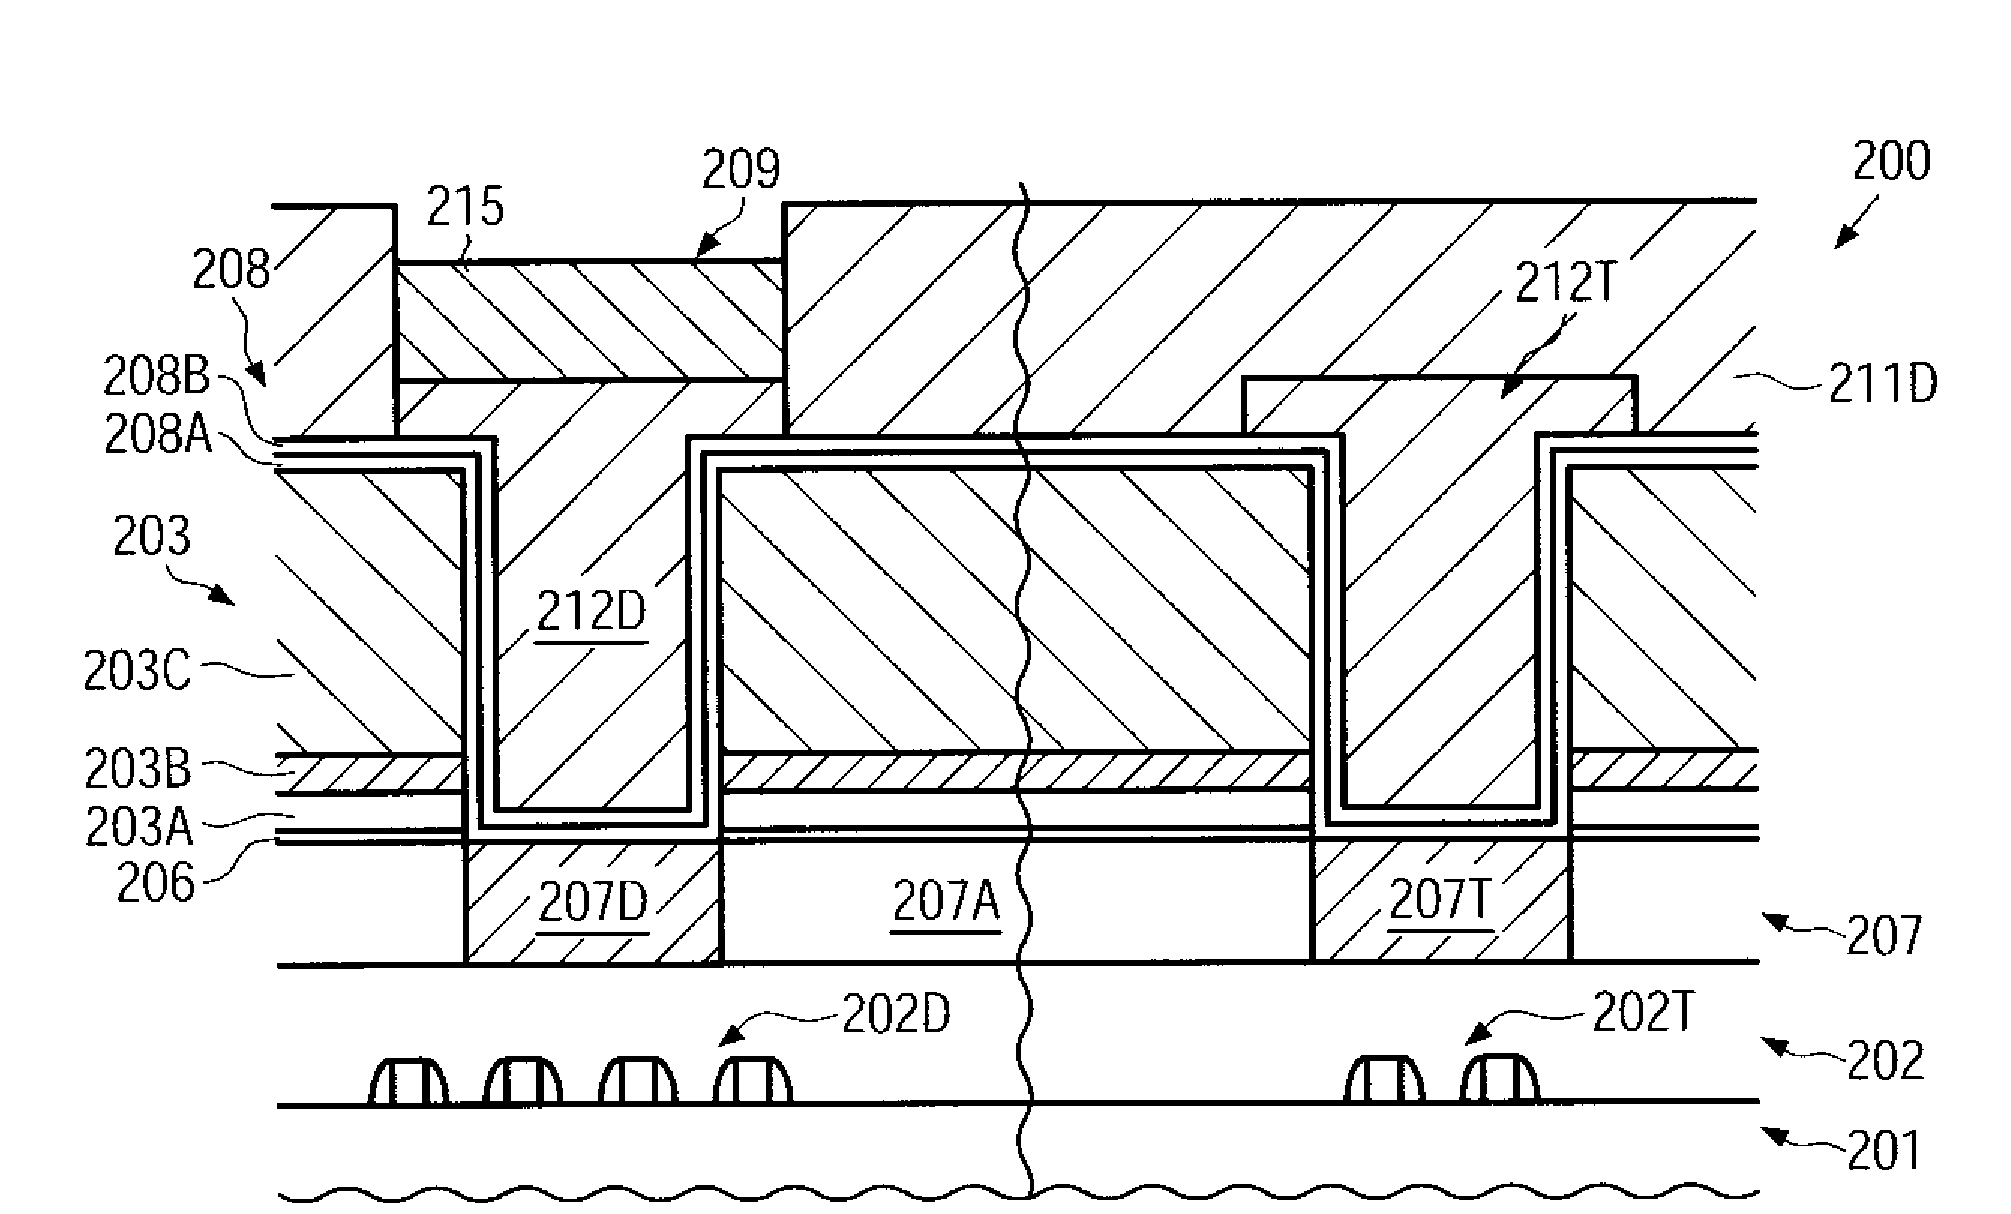 Semiconductor device including a die region designed for aluminum-free solder bump connection and a test structure designed for aluminum-free wire bonding